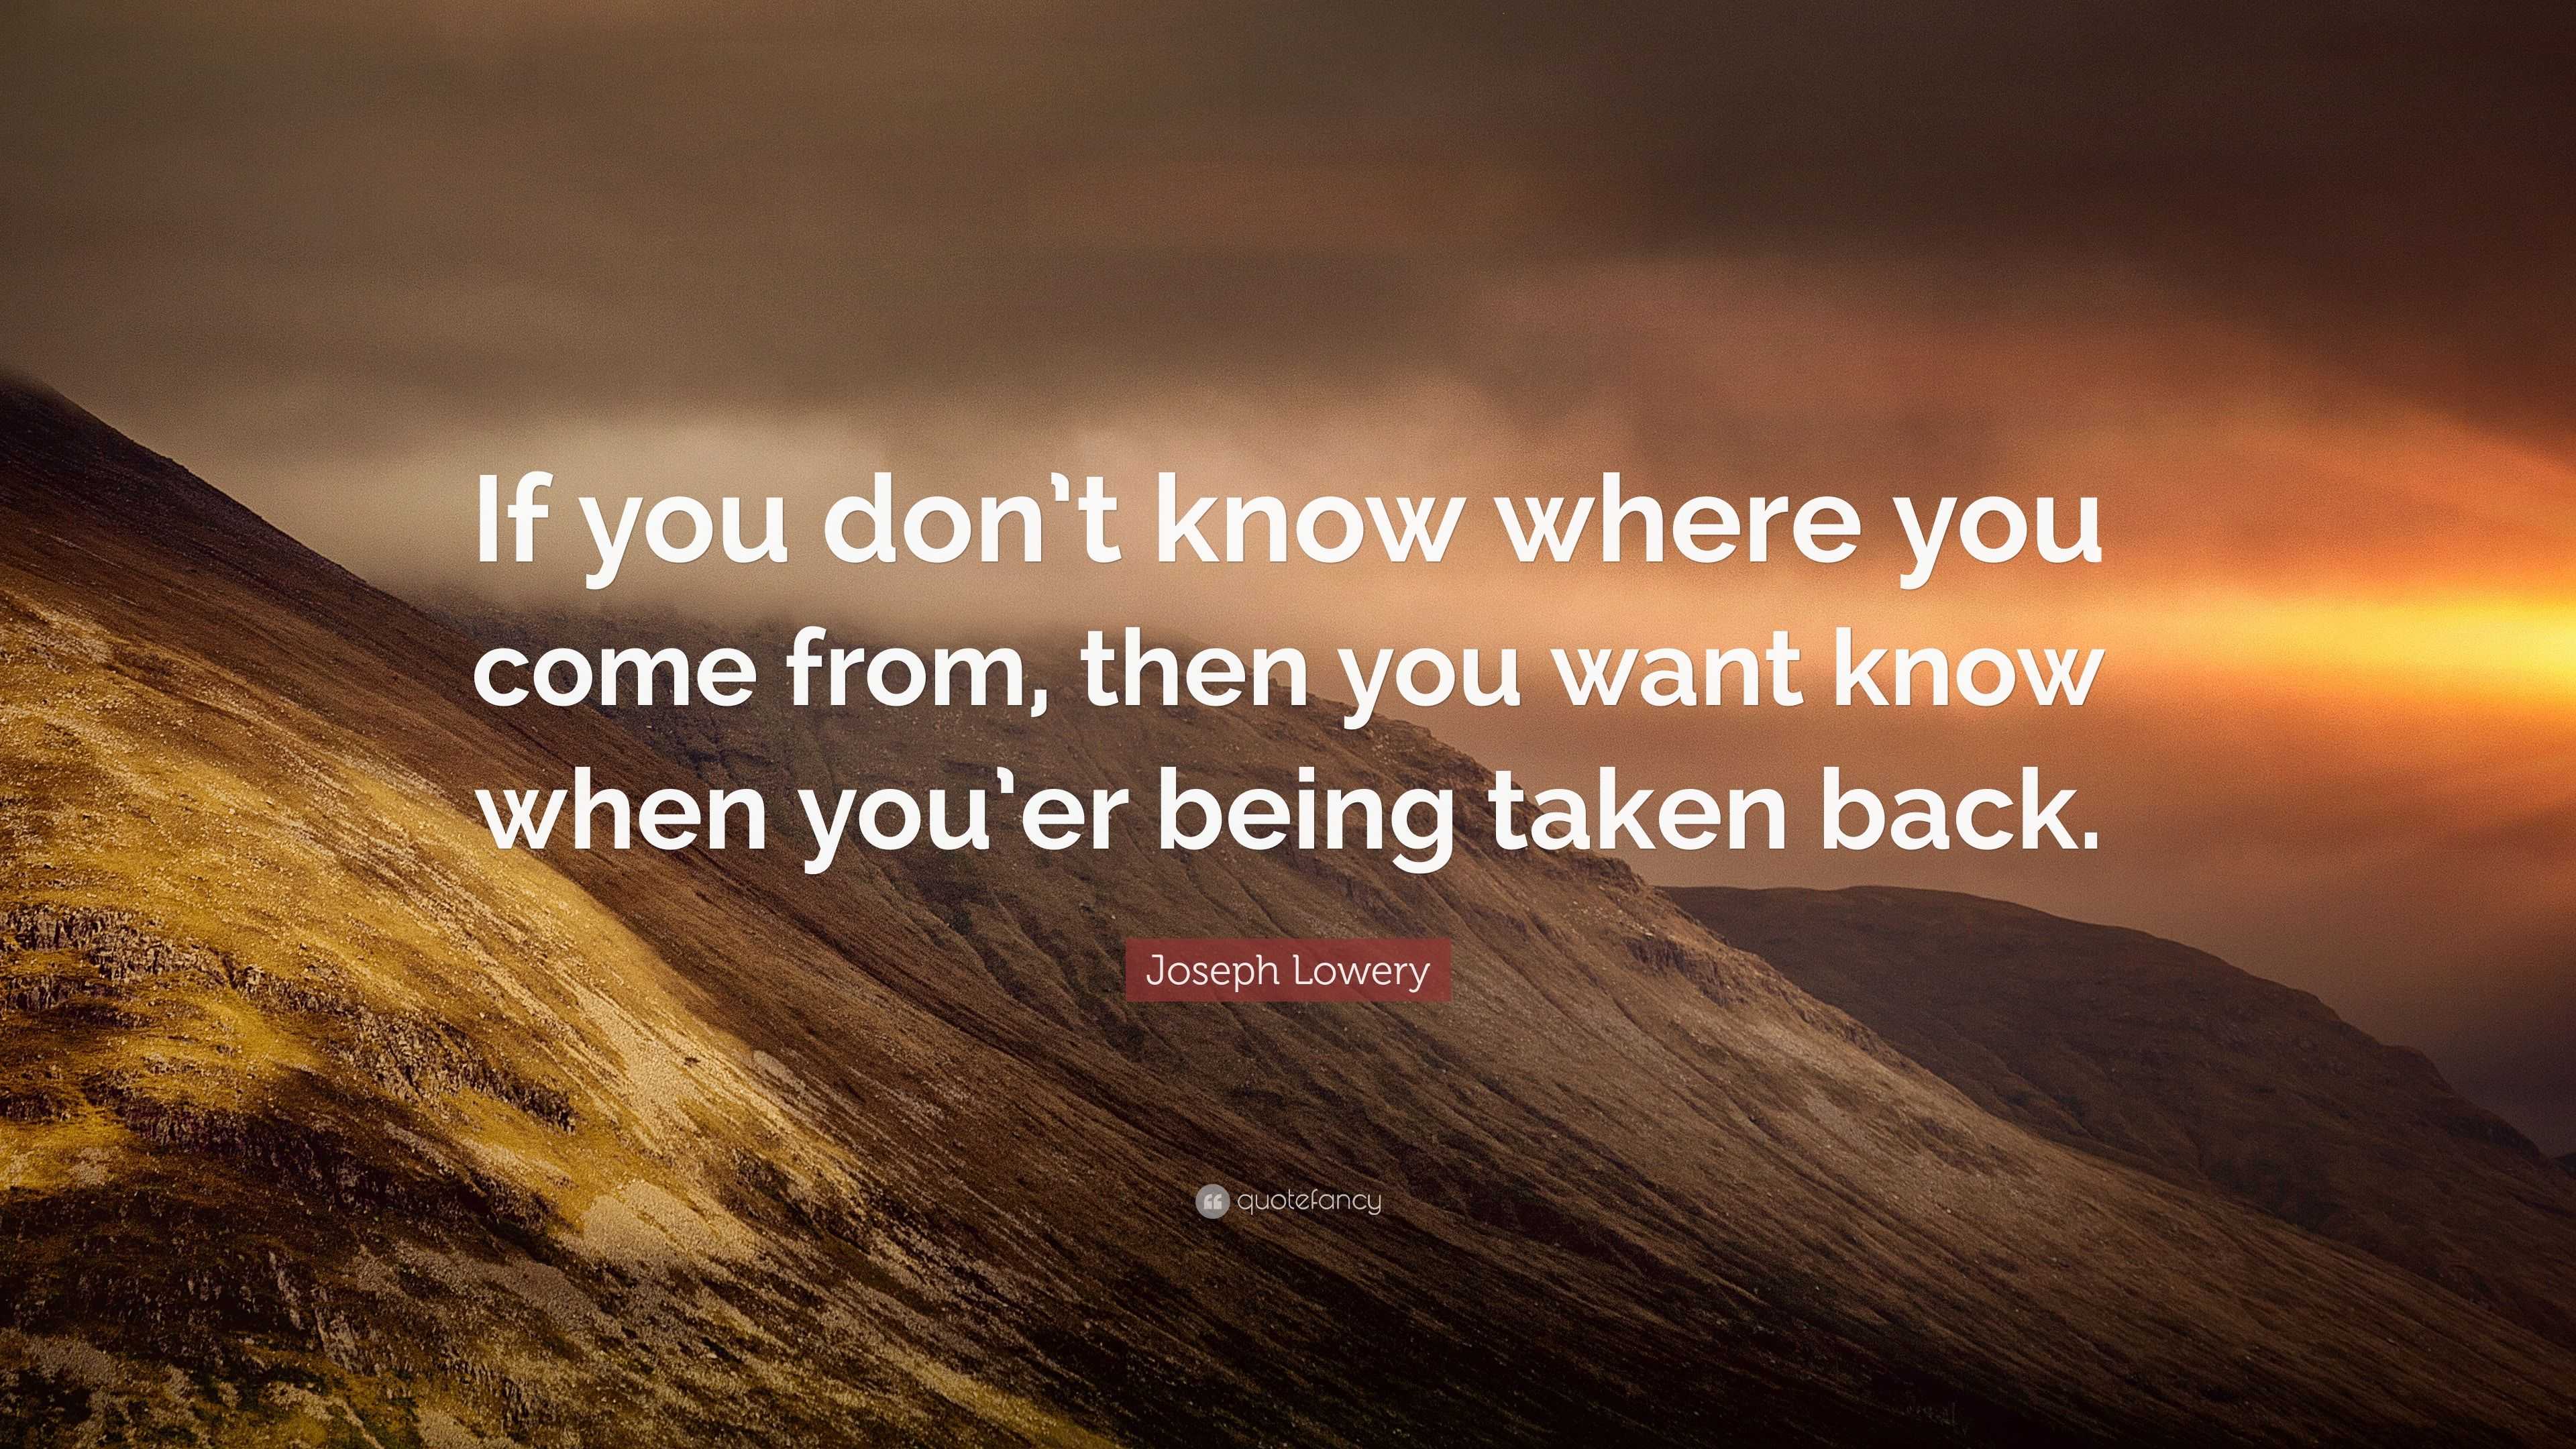 Joseph Lowery Quote: “If you don’t know where you come from, then you ...